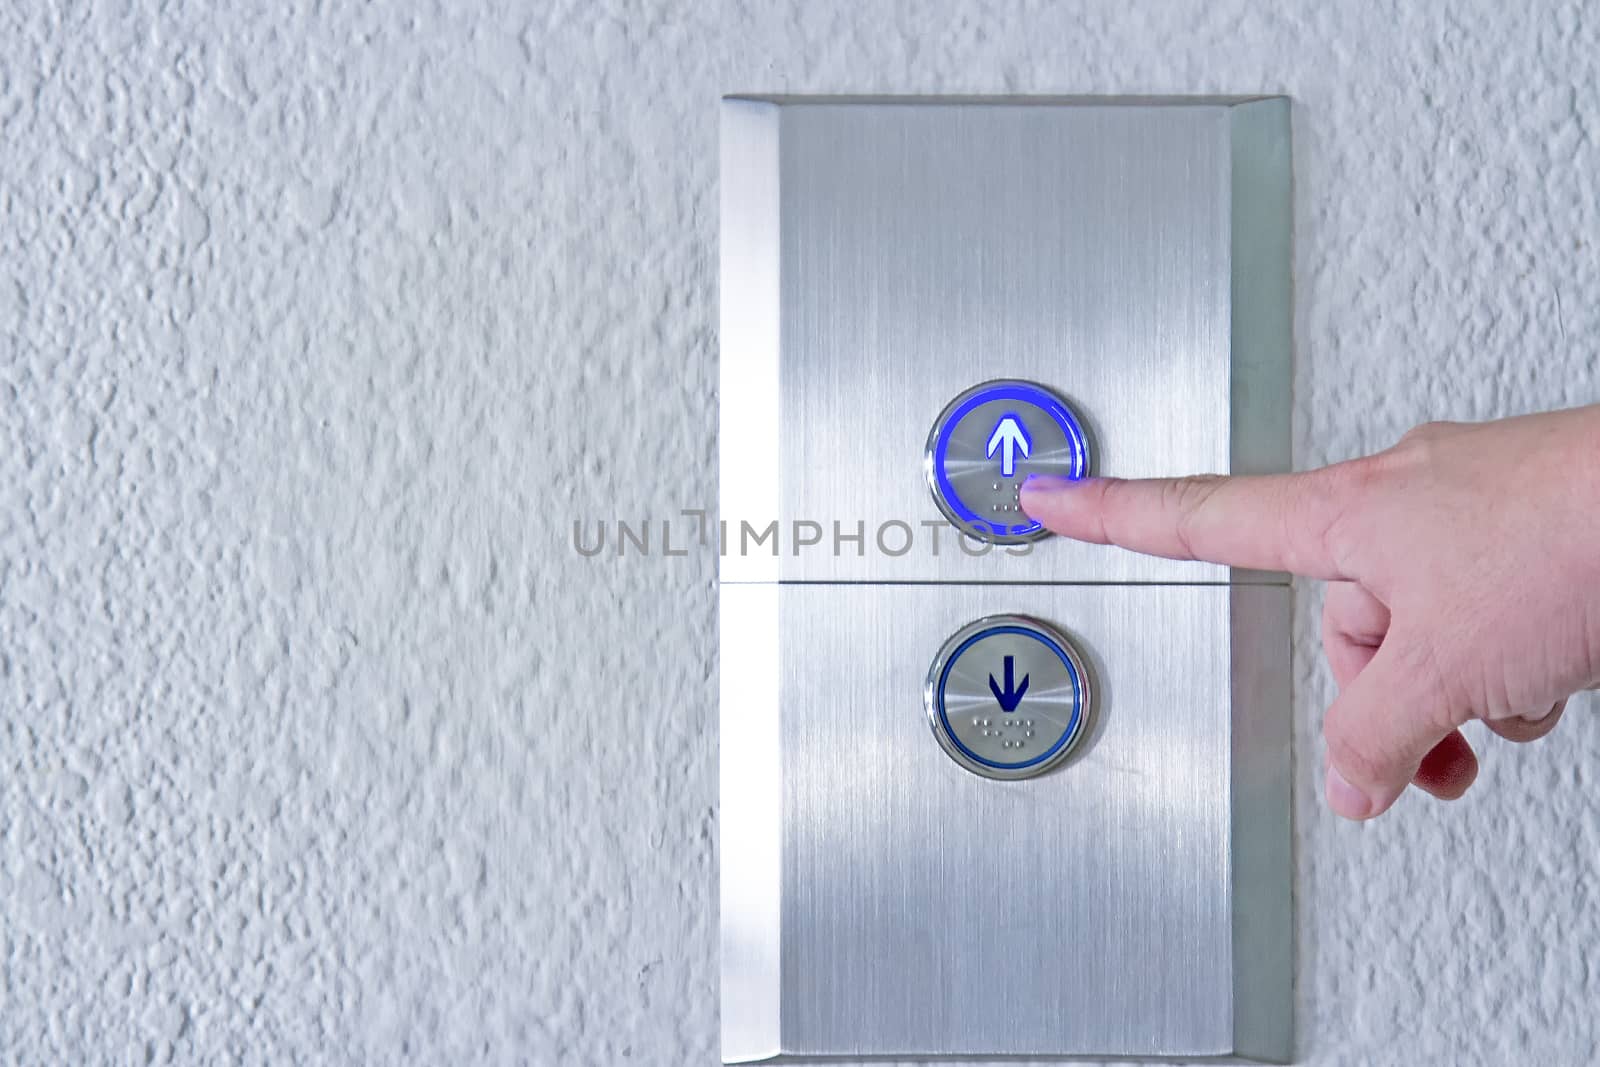 Using hands, press the elevator up and keypad elevator and bottom key